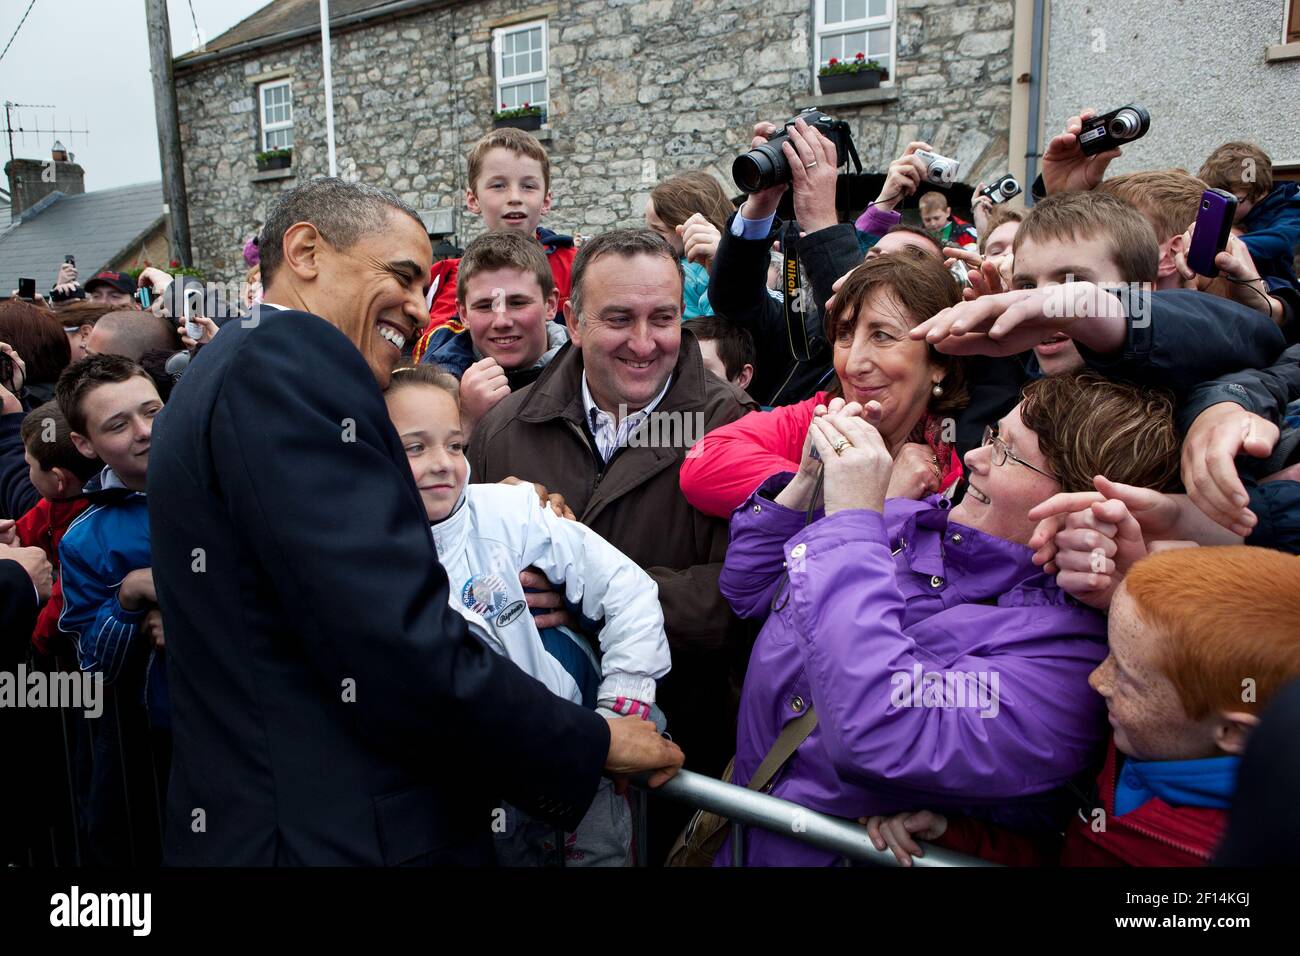 President Barack Obama is photographed with a young girl during a walk along Main Street in Moneygall Ireland May 23 2011. Stock Photo